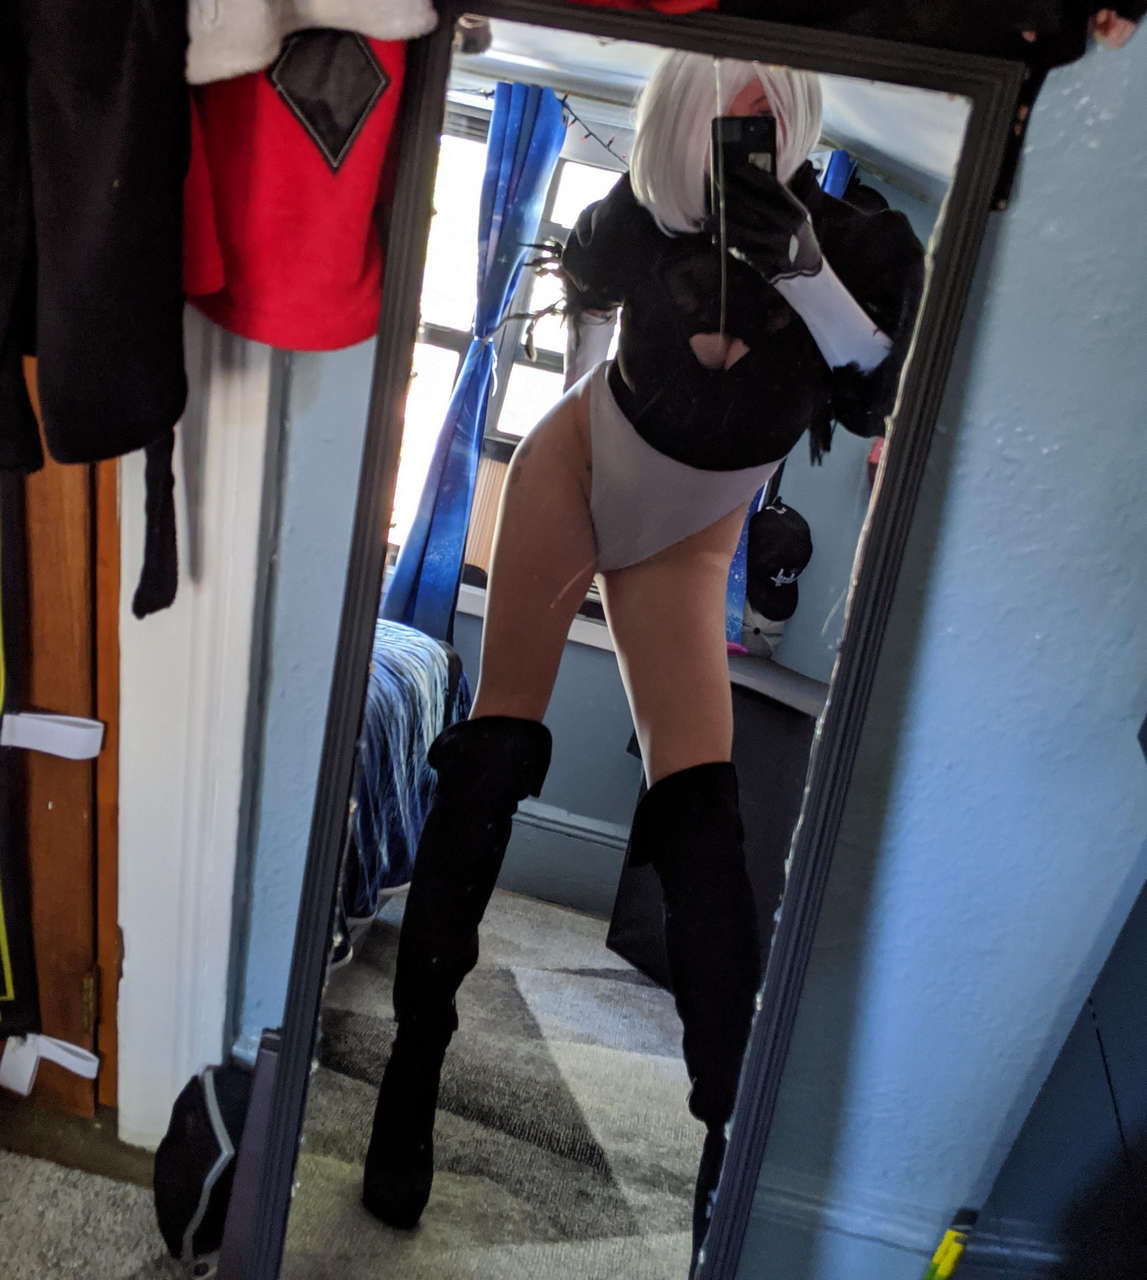 2b Or Not 2